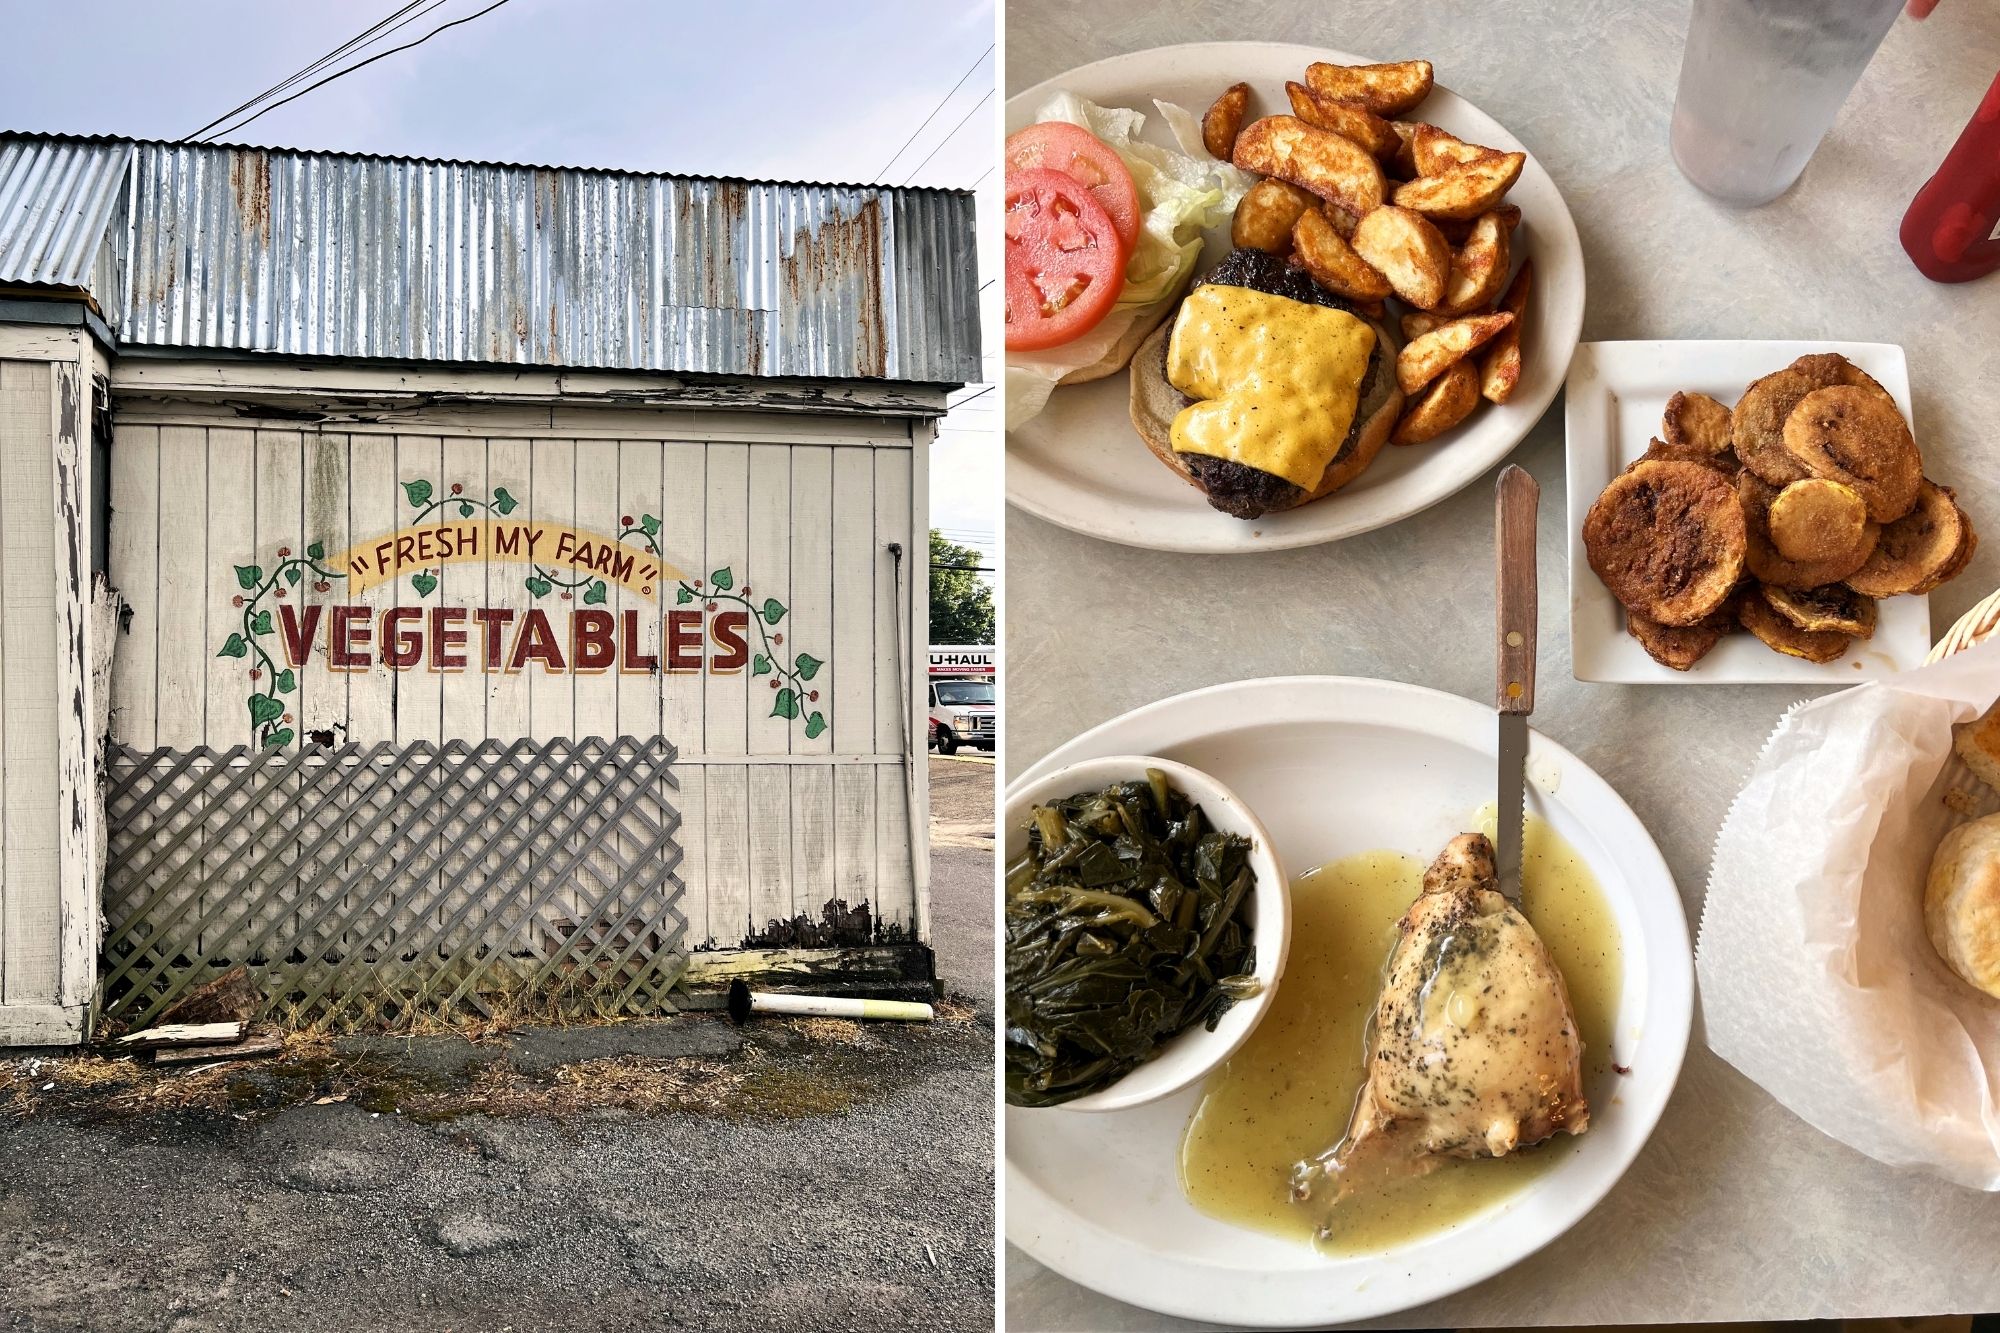 Collage: An exterior of a building that reads "Fresh My Farm Vegetables" and an overhead shot of a table with a chicken dish, collard greens, fried squash, a cheeseburger, and biscuits